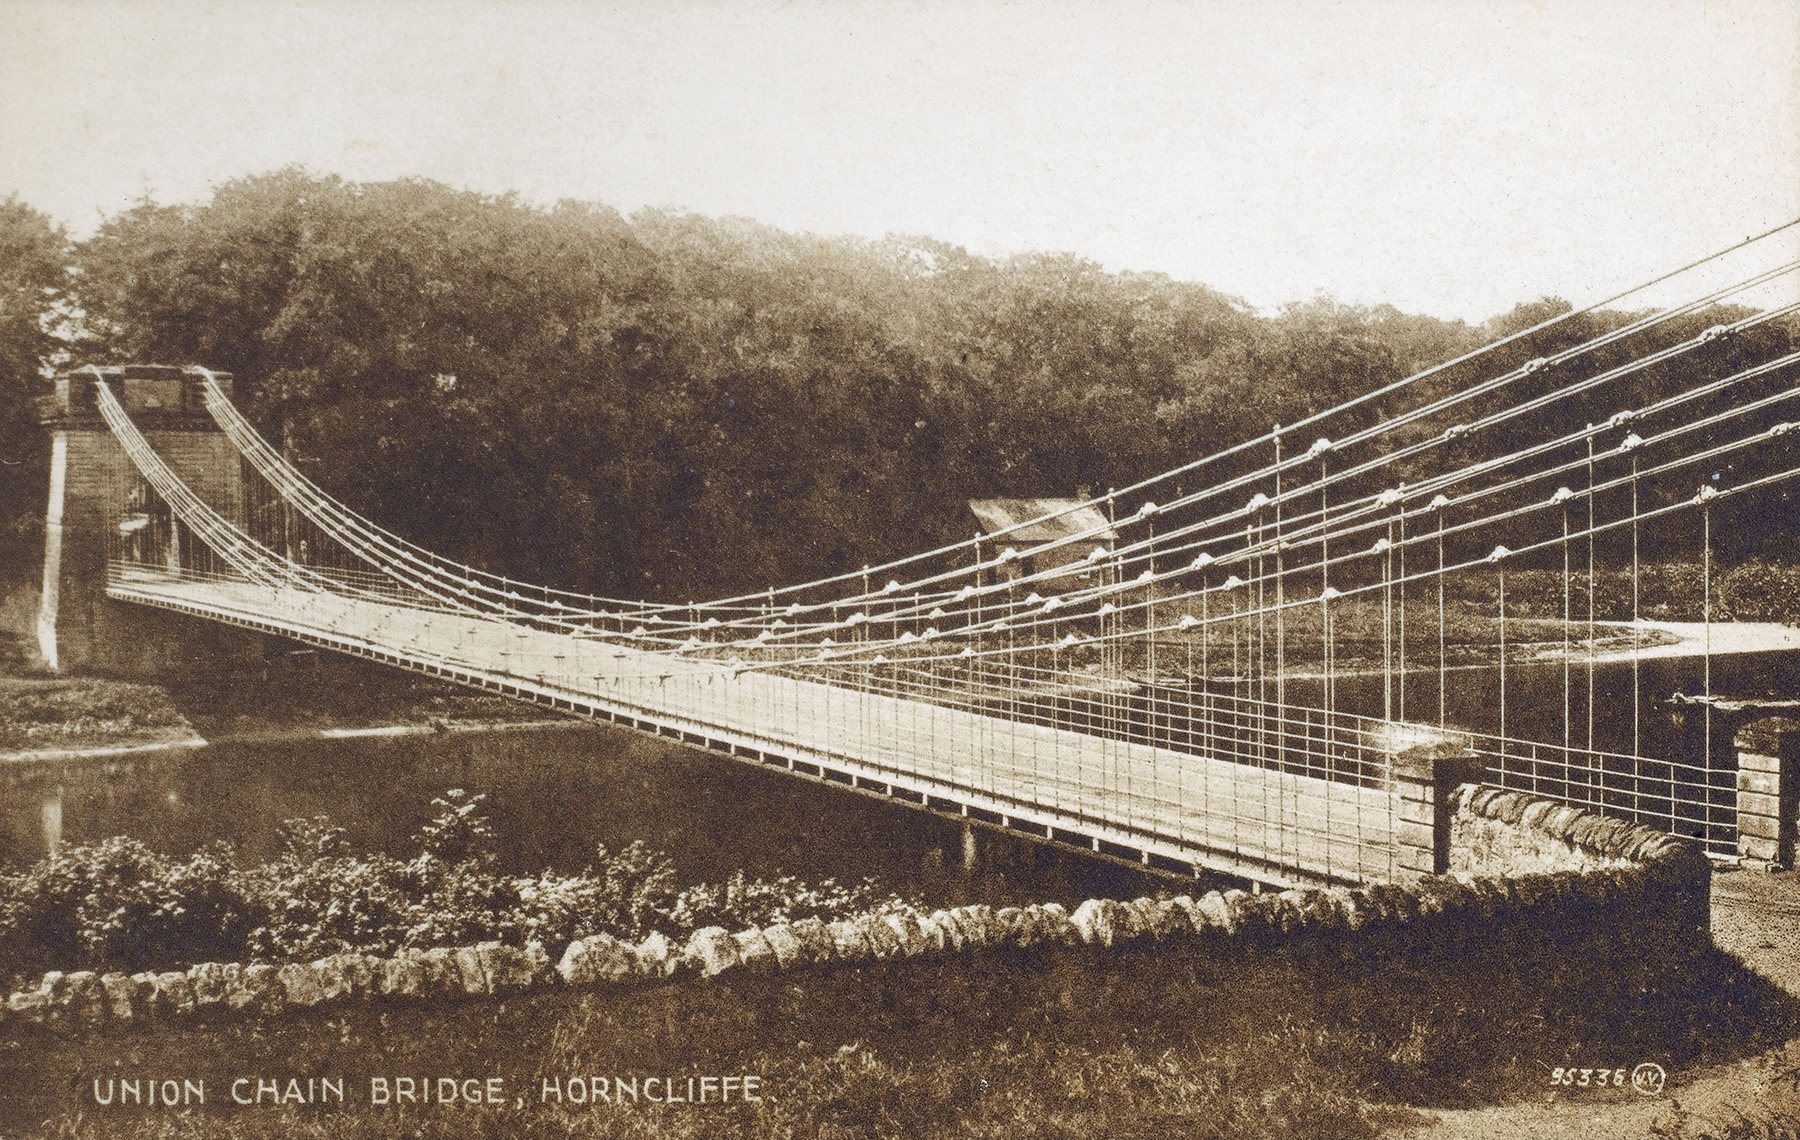 A sepia-toned picture shows the deck and piers of a bridge that spans a body of water. The suspension system comprises iron rods and chains. 